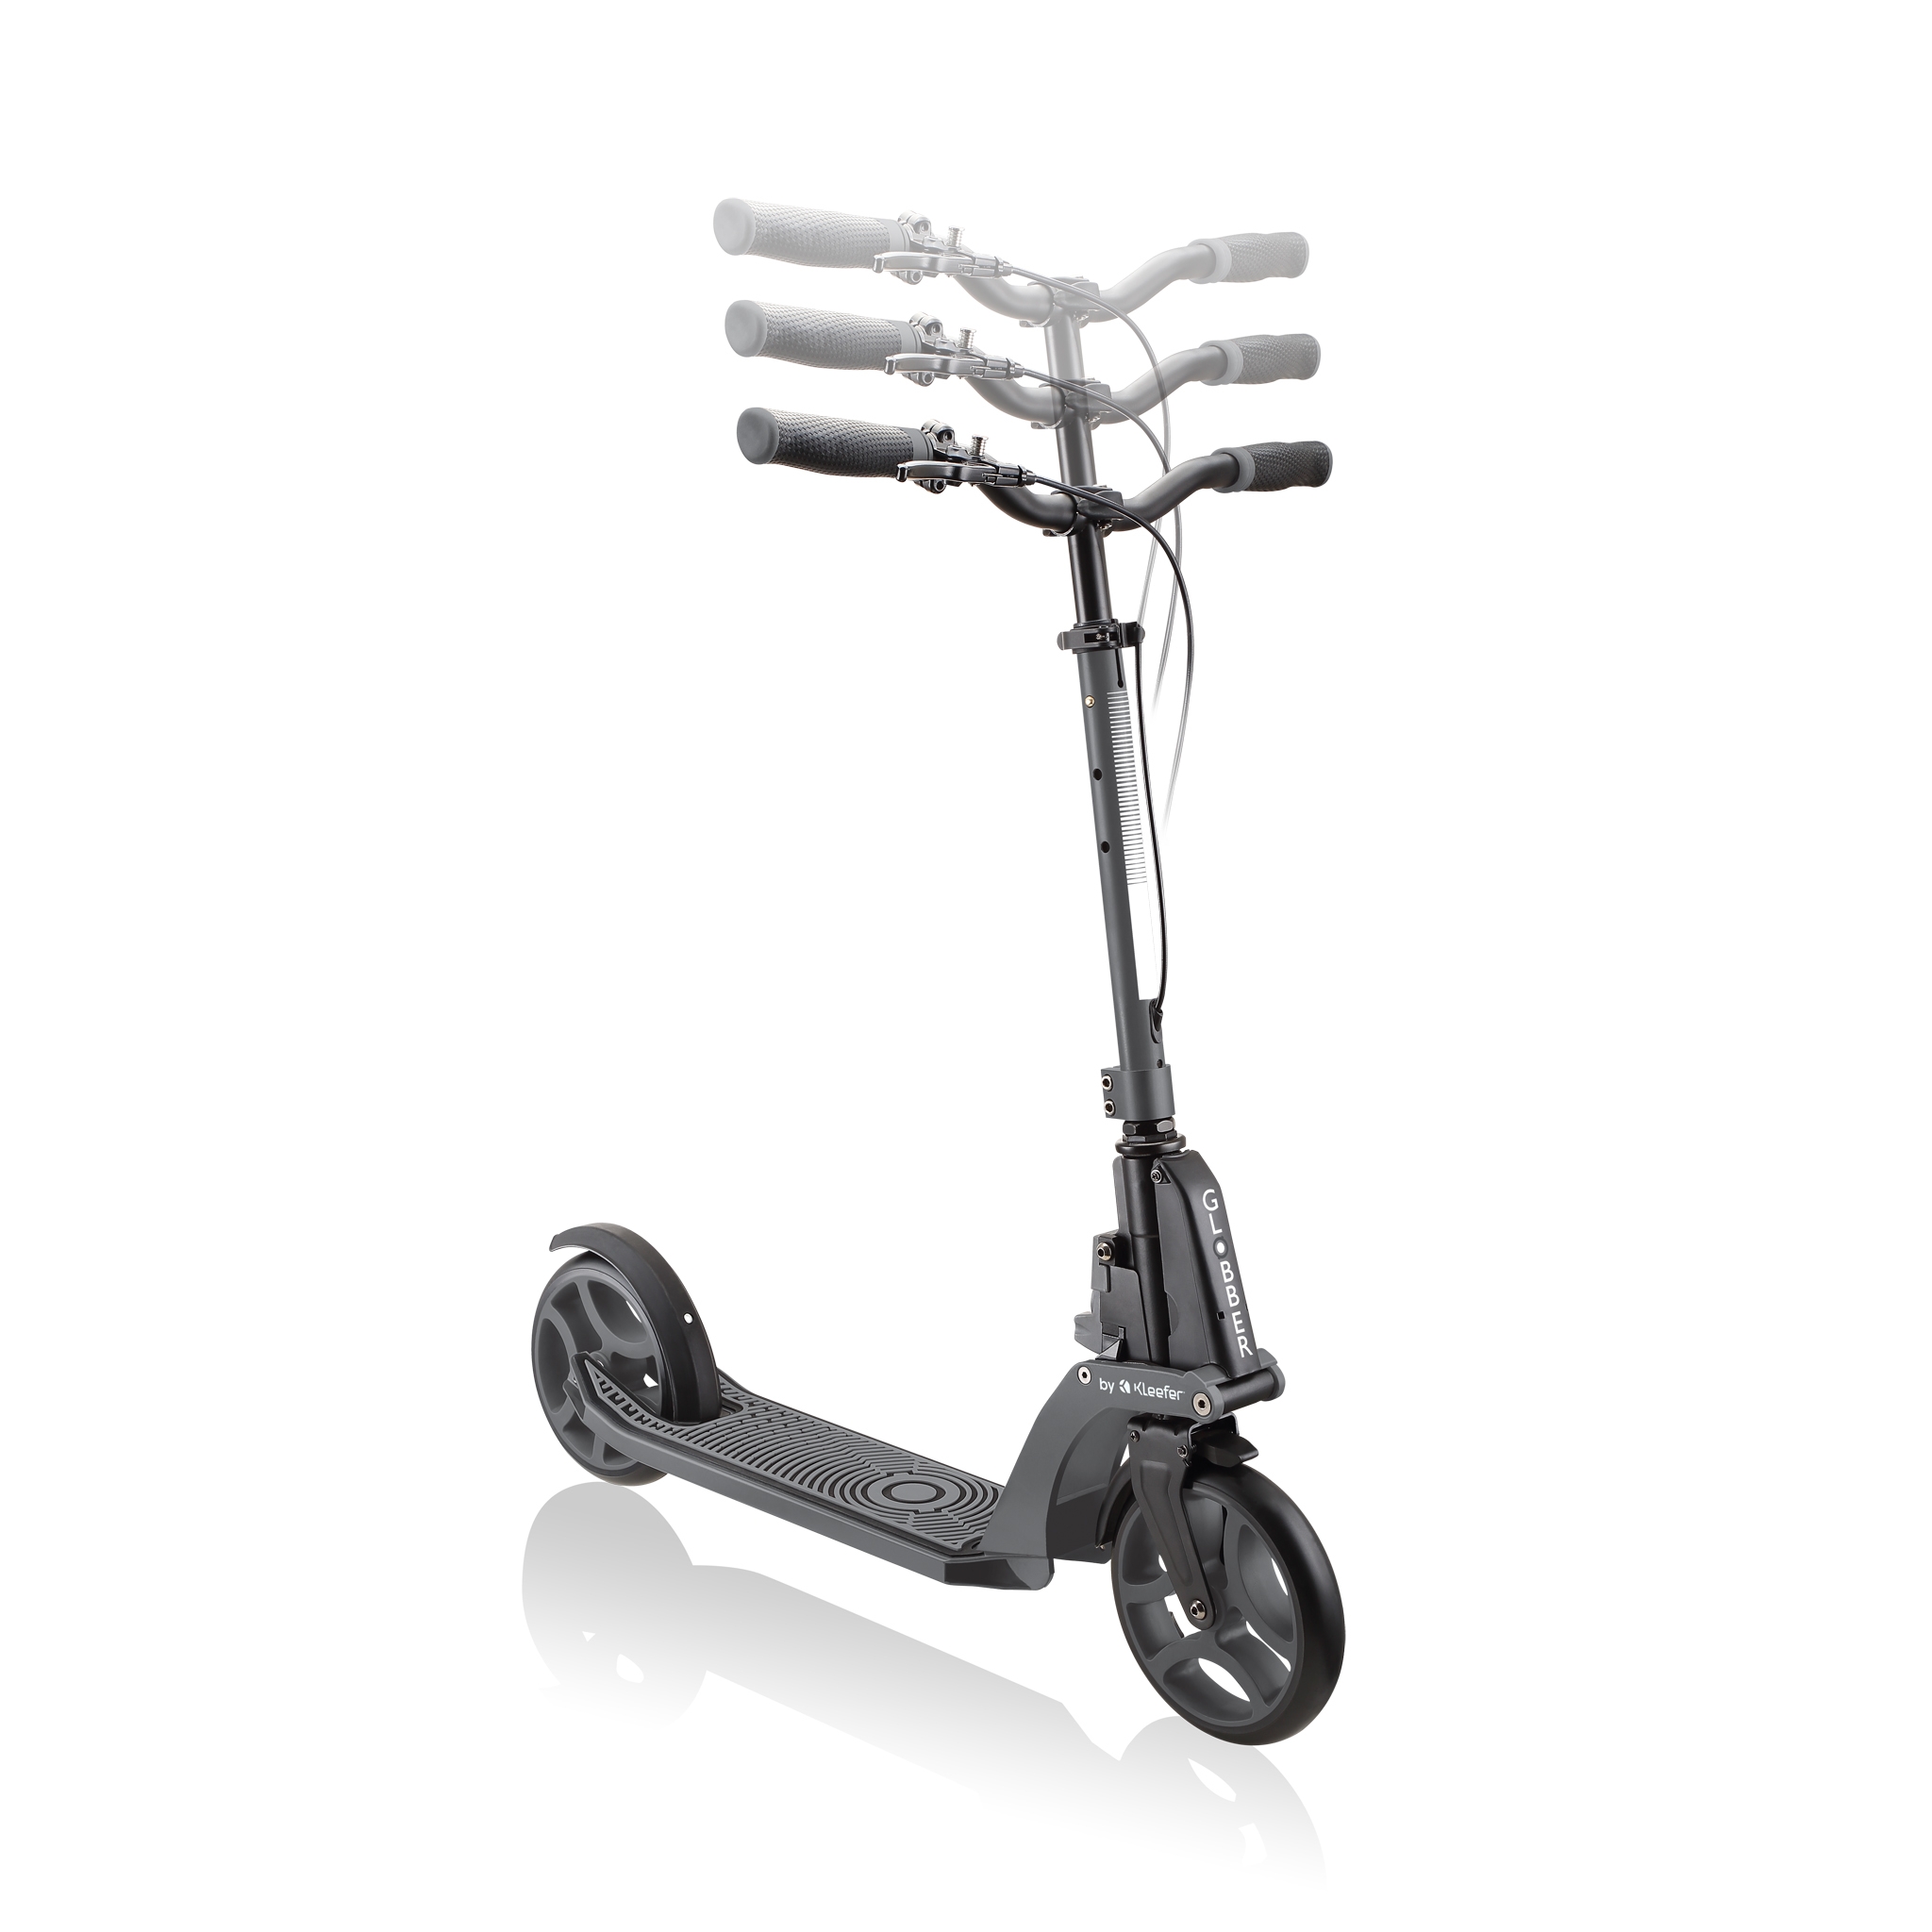 ONE-K-200-PISTON-DELUXE-adjustable-folding-scooter-for-adults 5